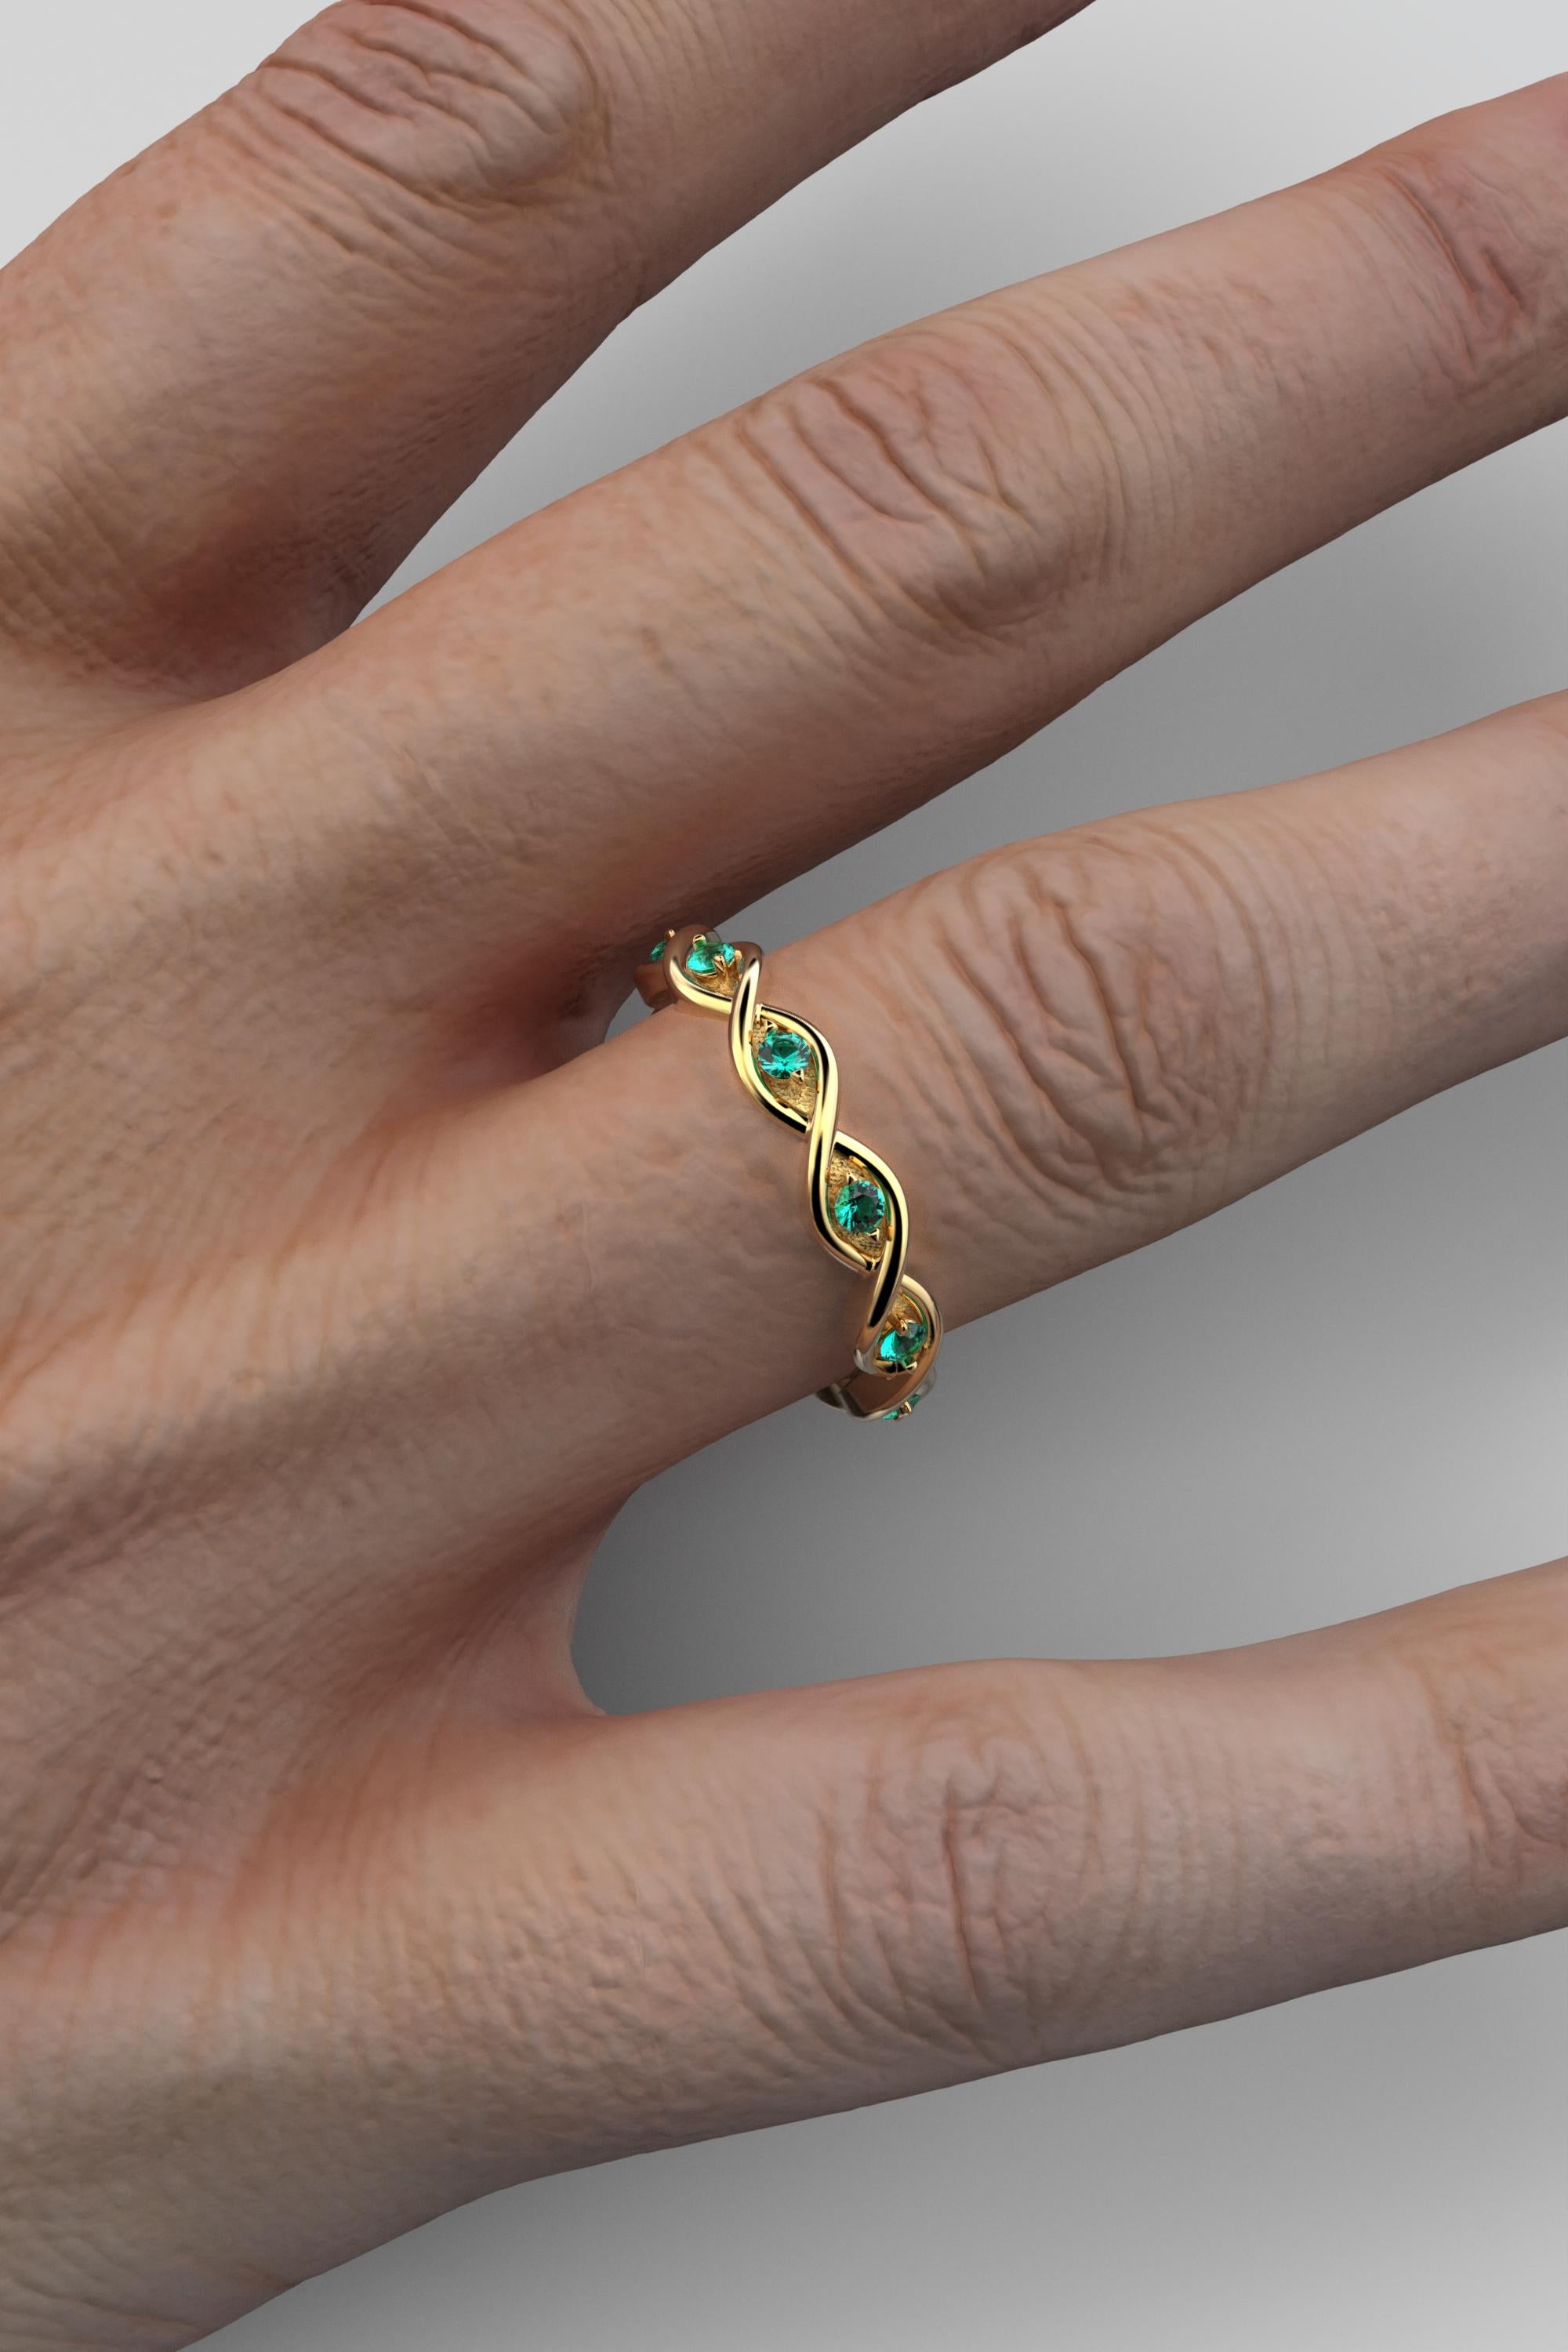 For Sale:  Oltremare Gioielli Emerald Gold Eternity Band in 14k, Made in Italy 4